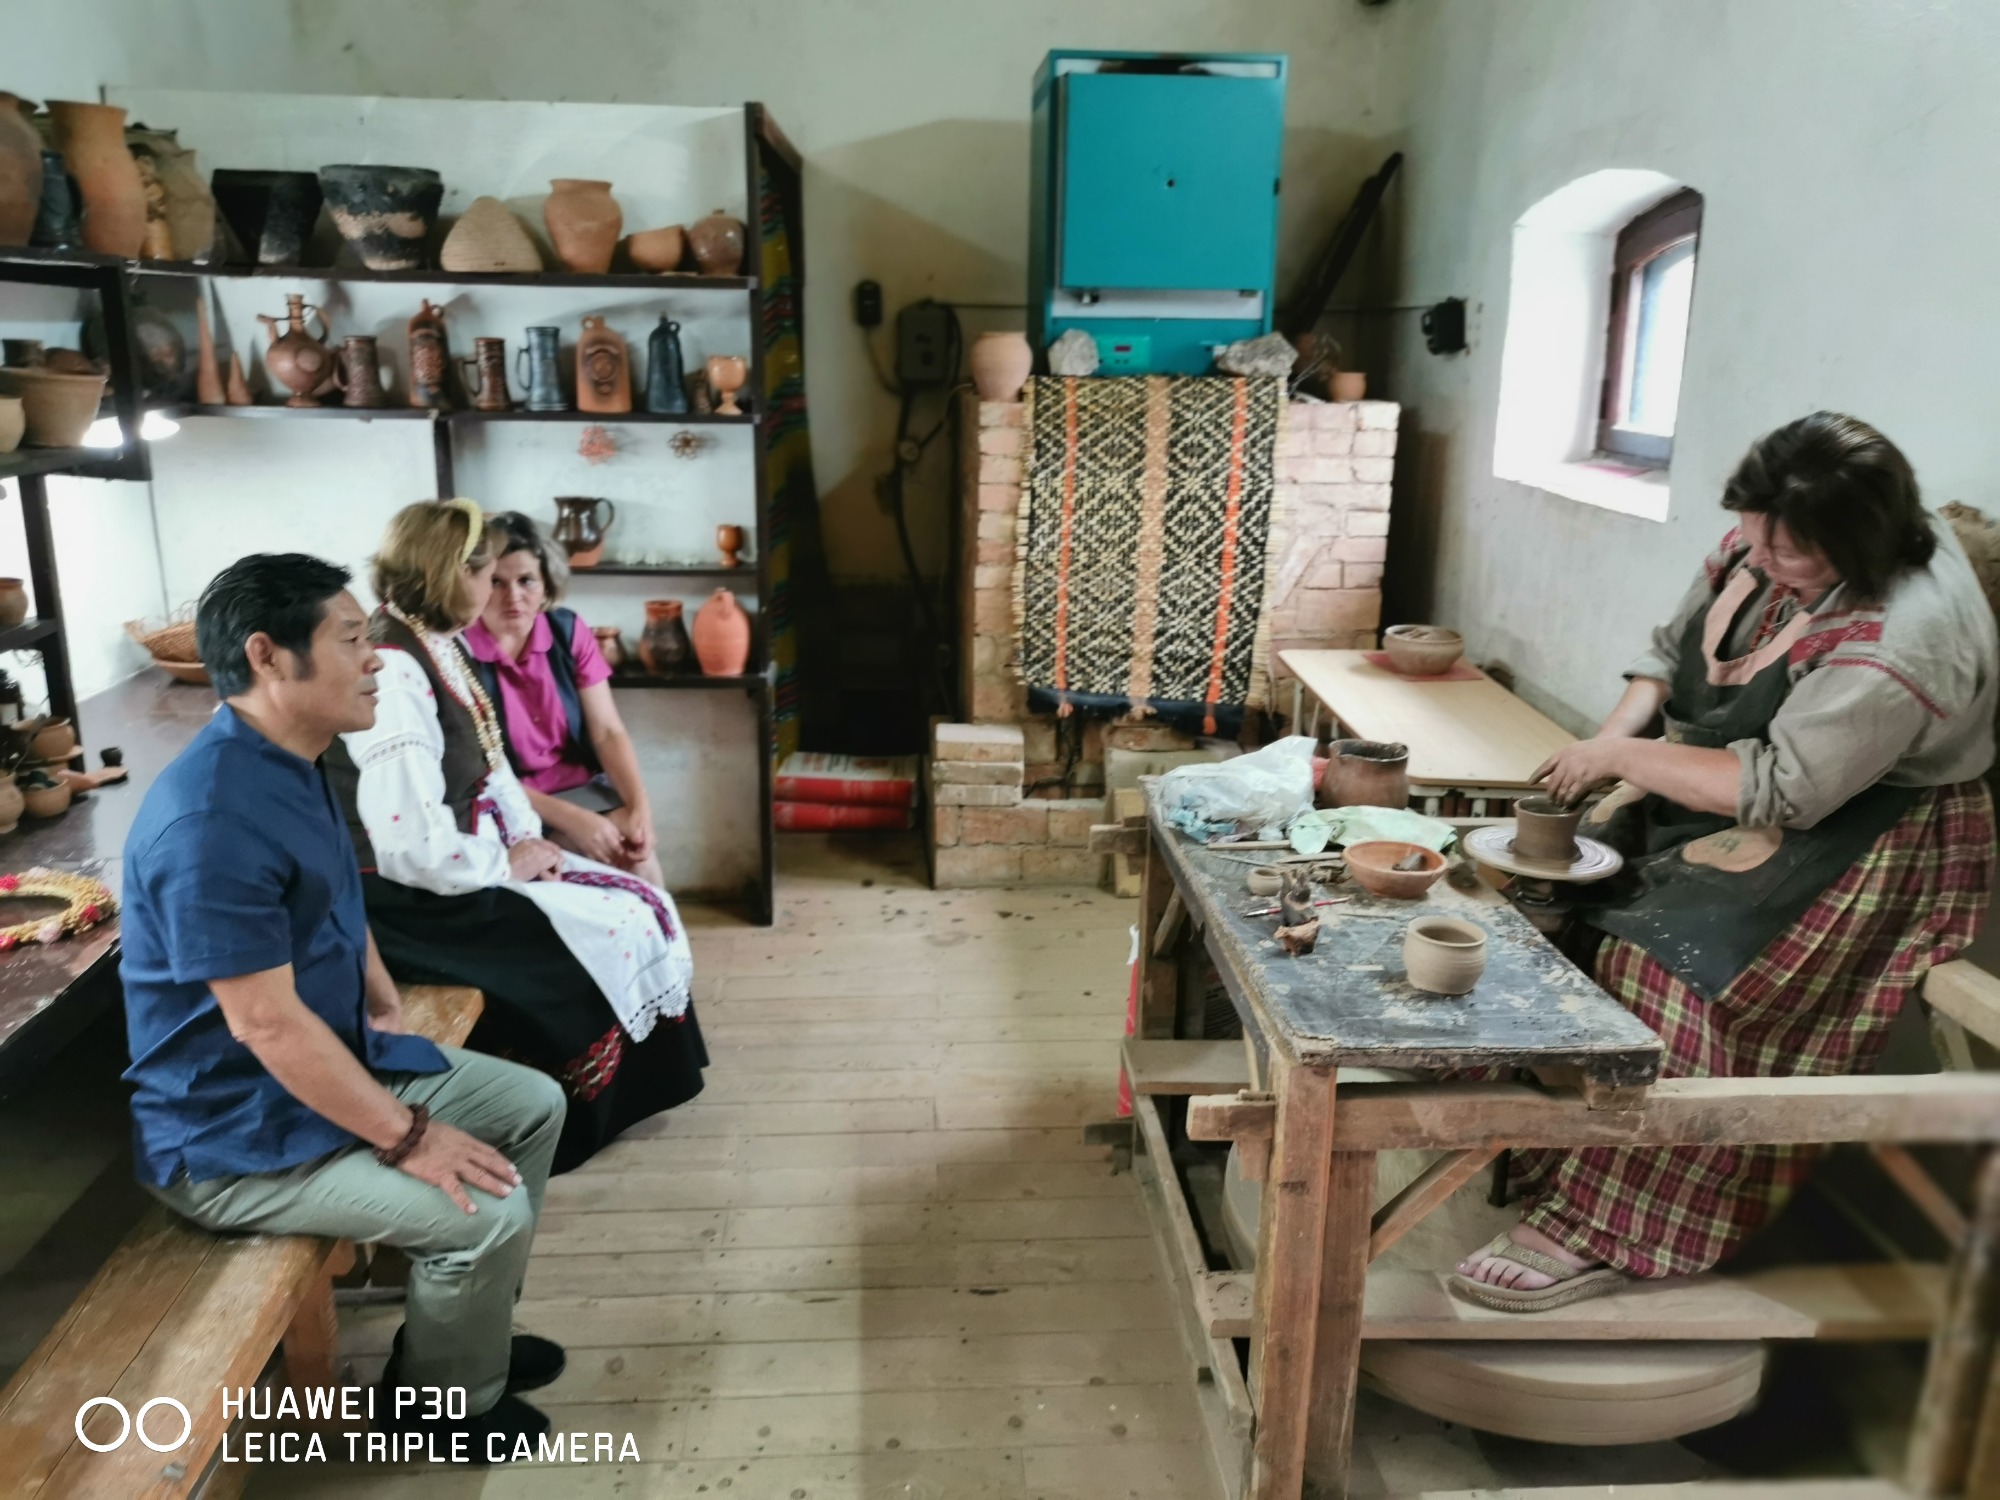 Visiting craft workshops, learning about local crafts, and having a nice conversation with craftspeople themselves through our experienced interpreter